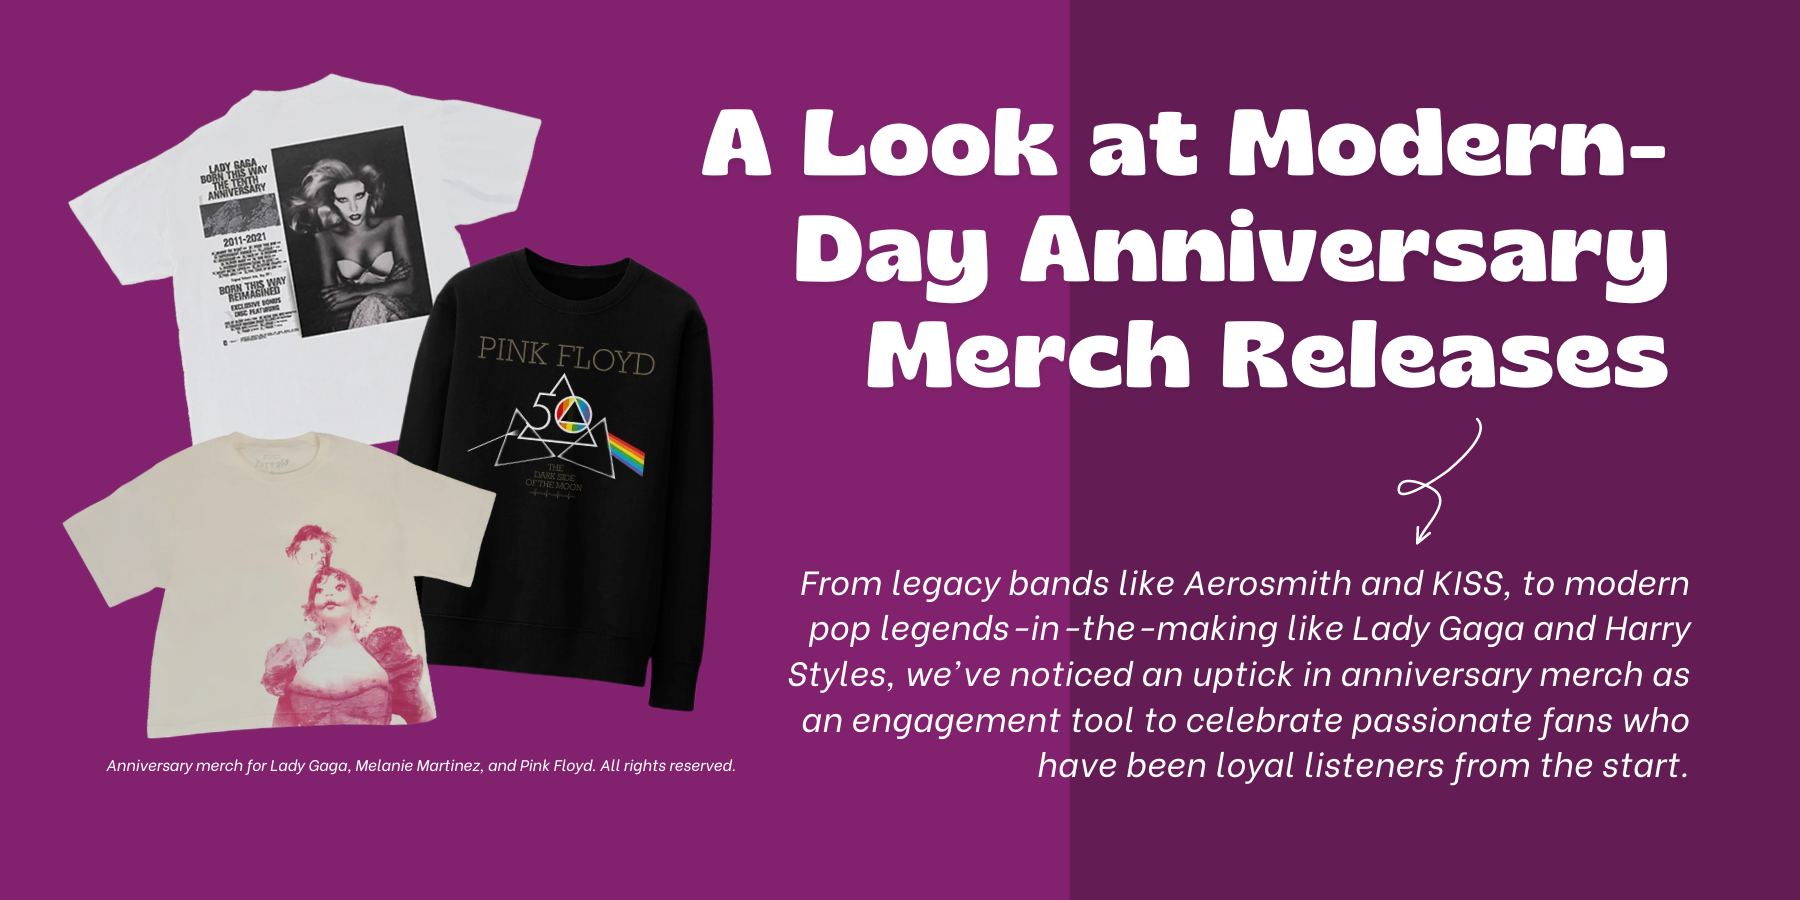 A Look at Modern-Day Anniversary Merch Releases